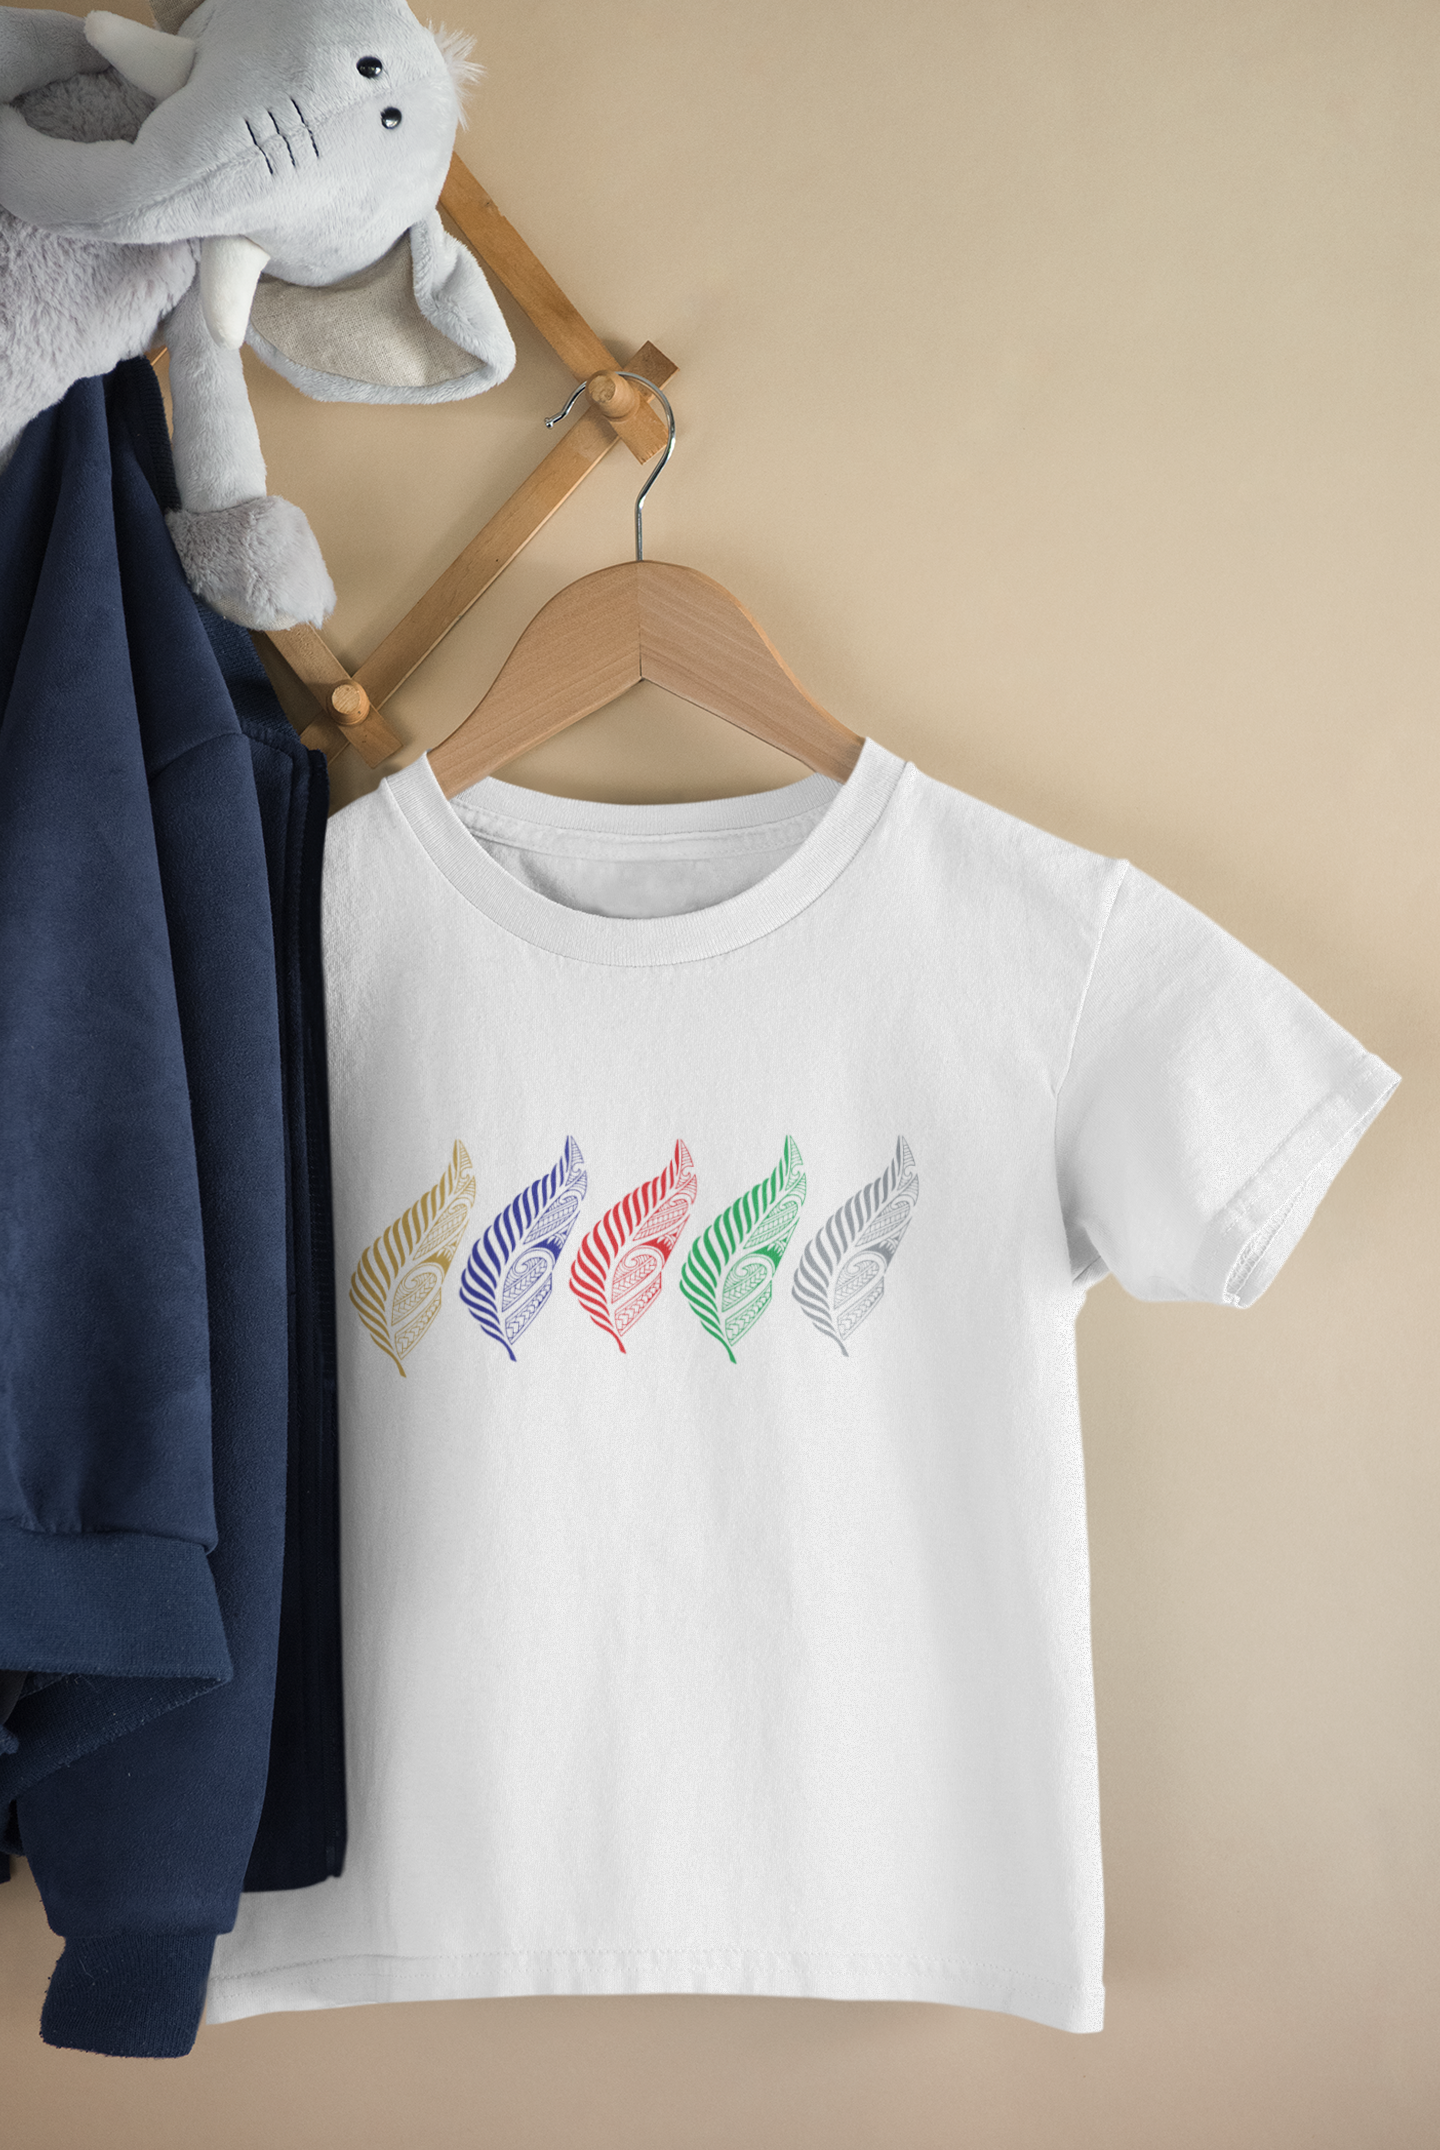 Unique Kiwi Collect - Childrens Tee - New Zealand Map